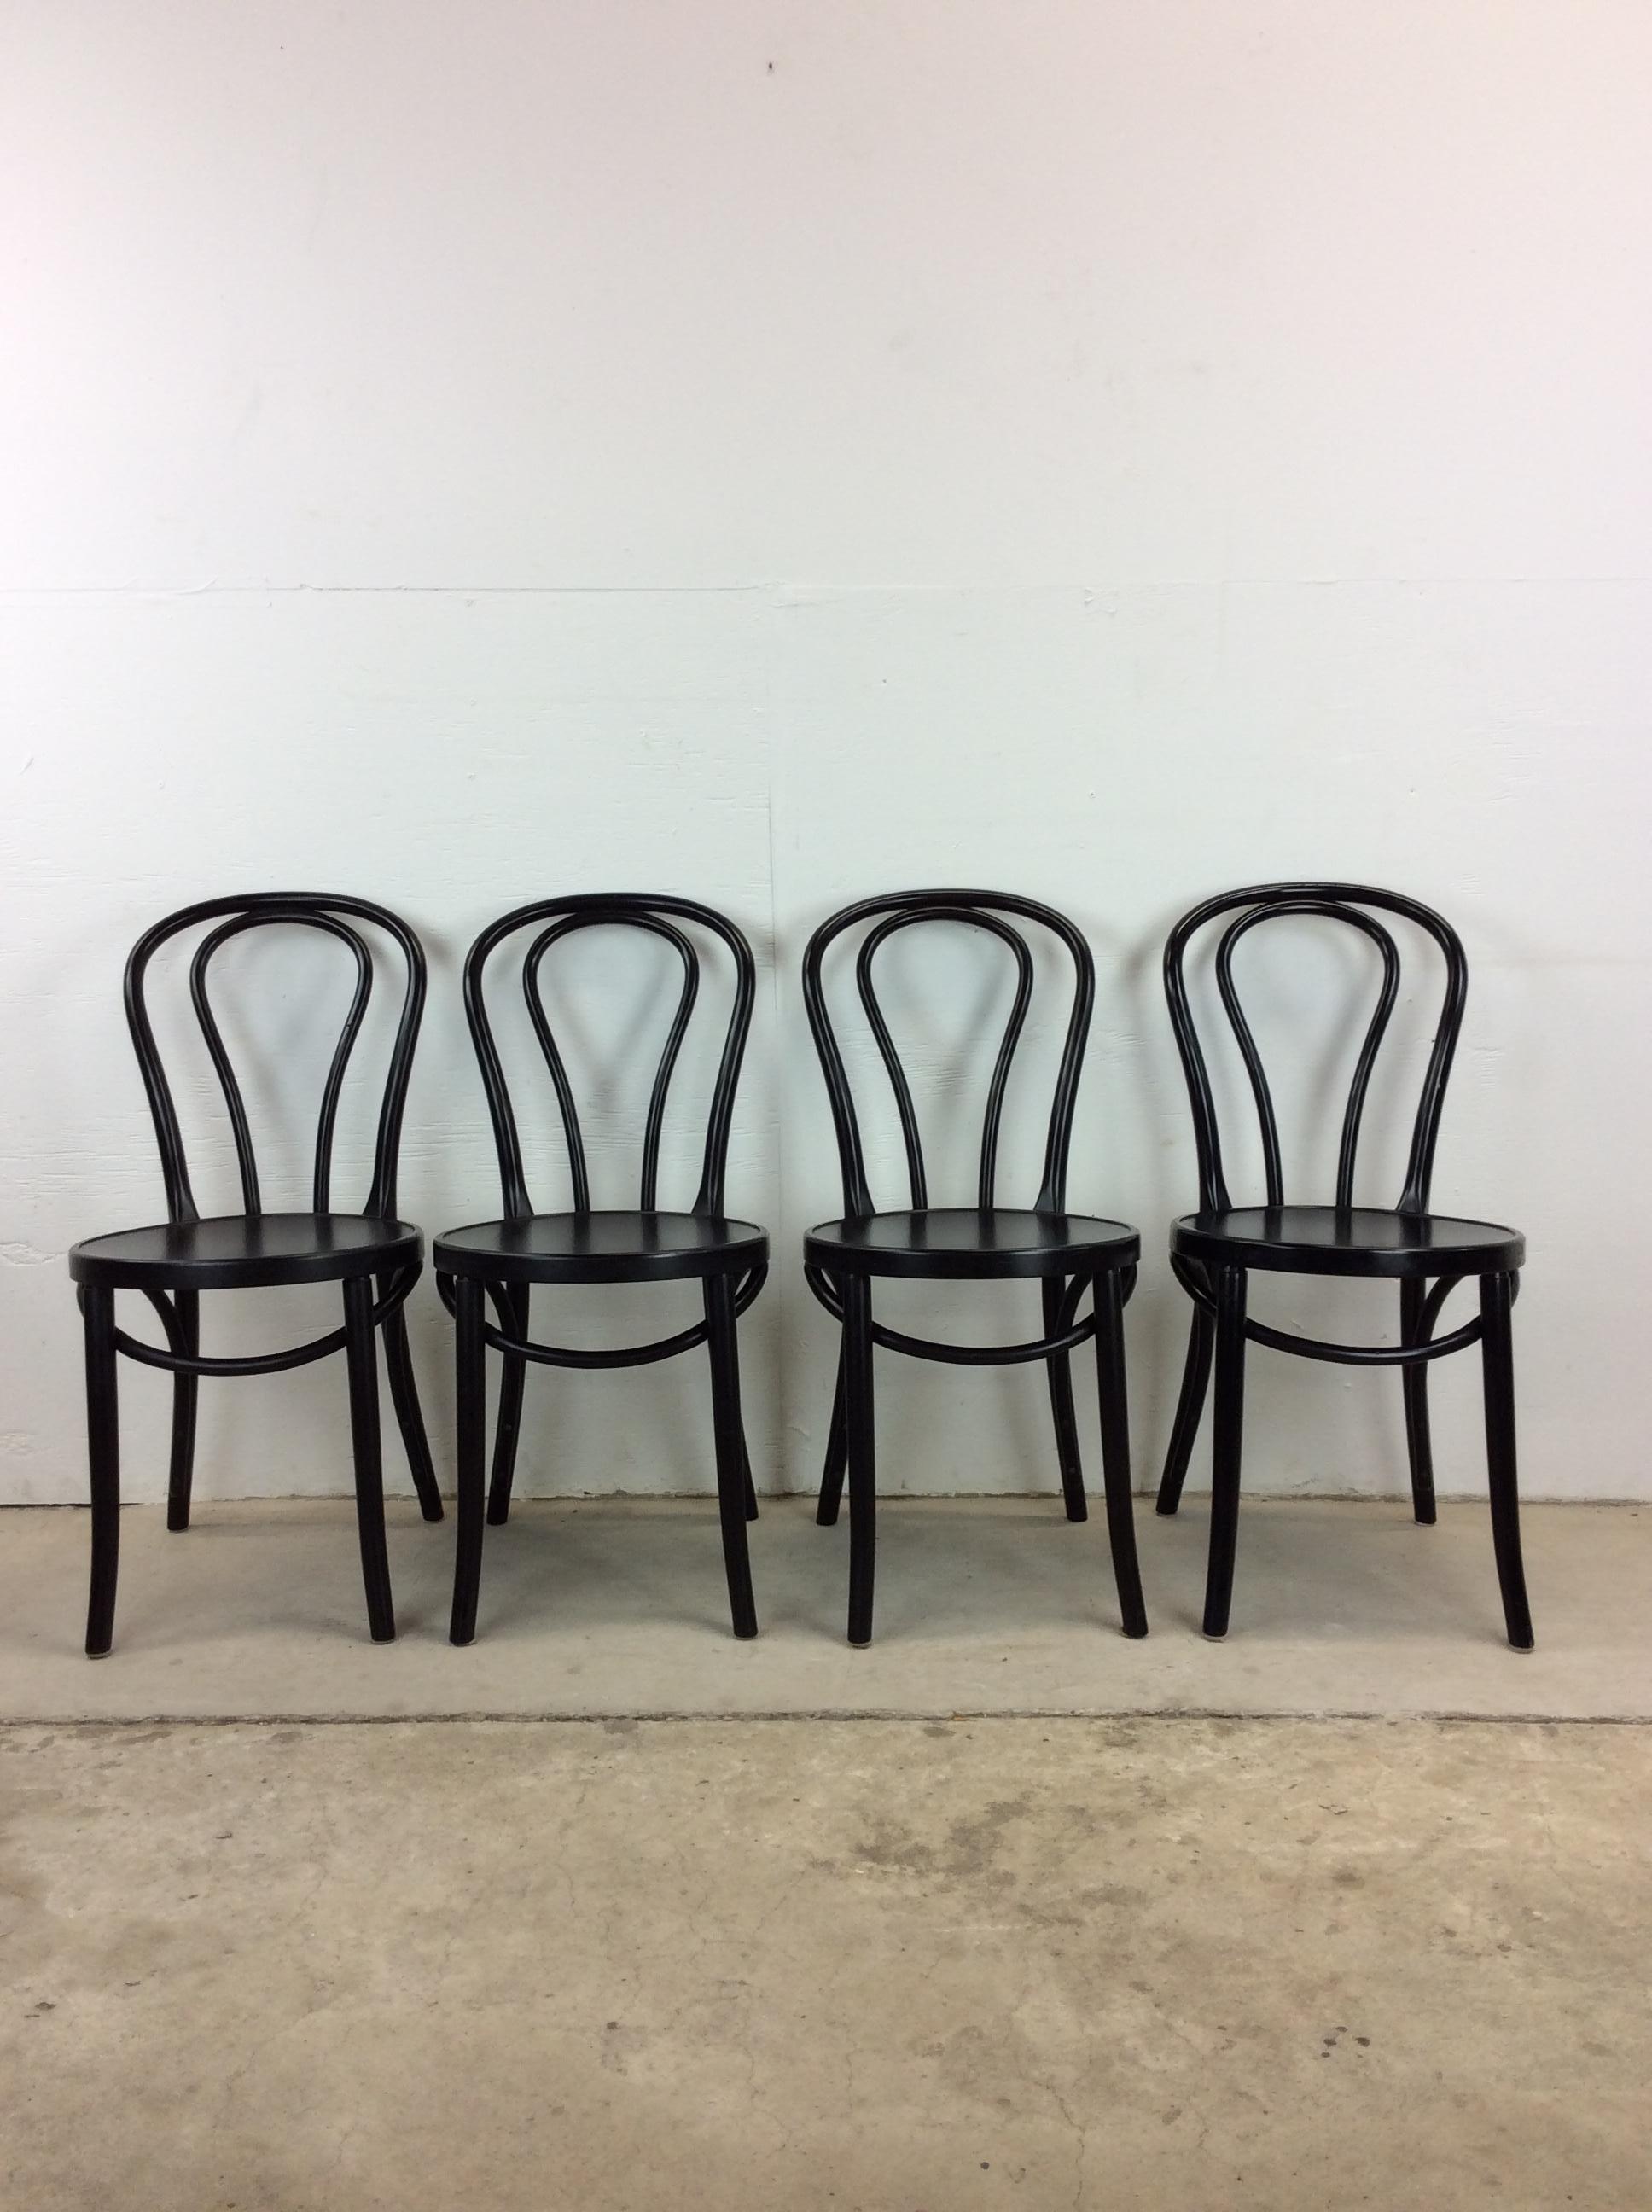 This set of 4 vintage Ikea chairs features classic cafe style design and durable plastic construction.

Complimentary black & white vintage Ikea dining table available separately.

Dimensions: 15.75w 14.5d 32.75h 17.75sh

Condition: Original lacquer